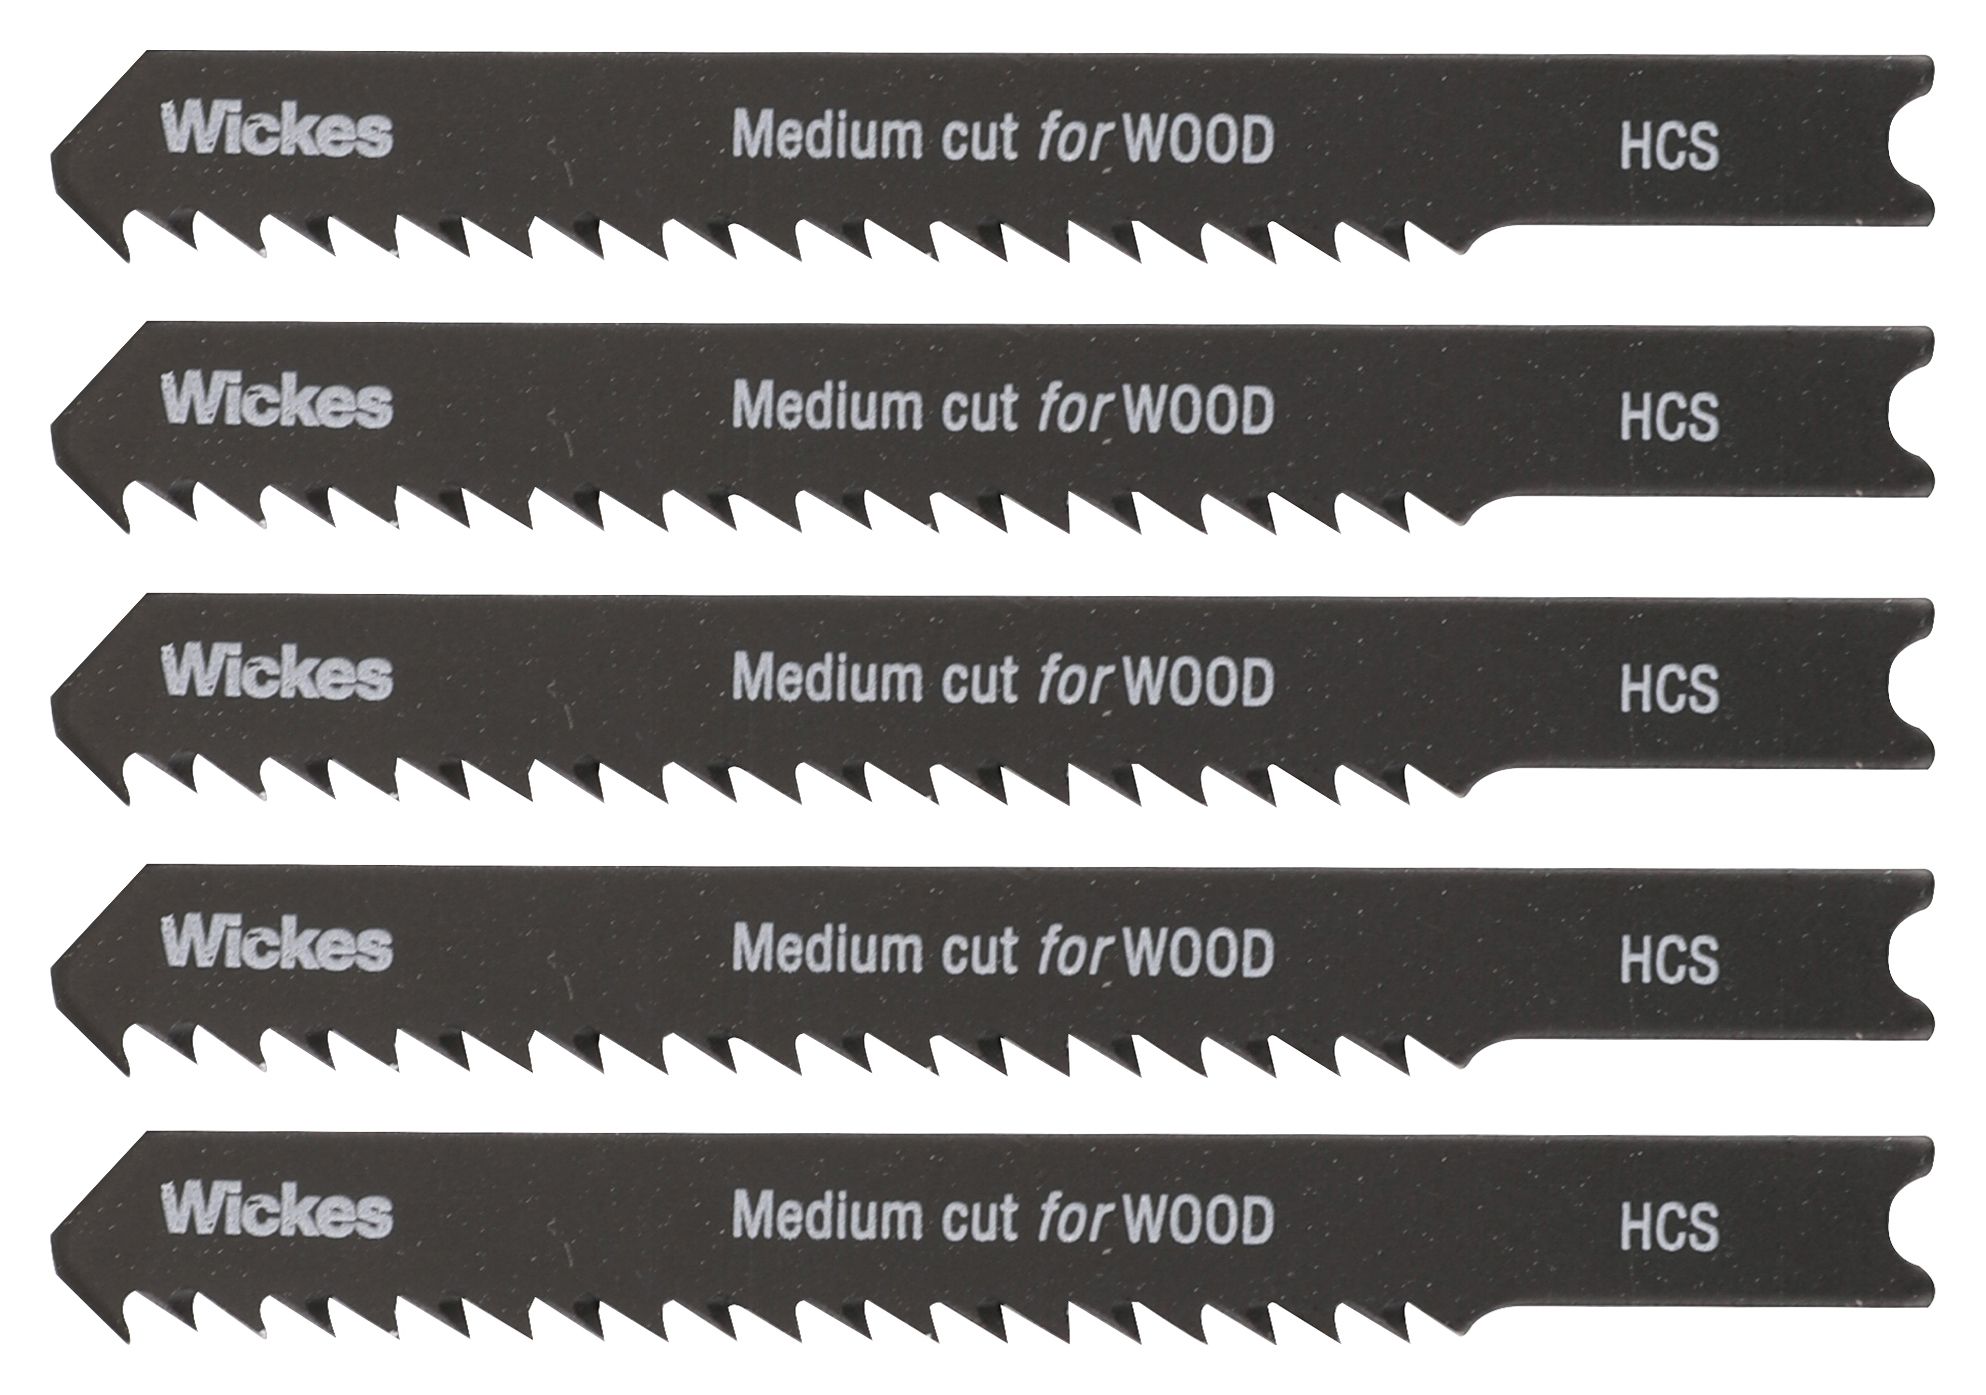 Image of Wickes Universal Shank Medium Cut Jigsaw Blade For Wood - Pack Of 5